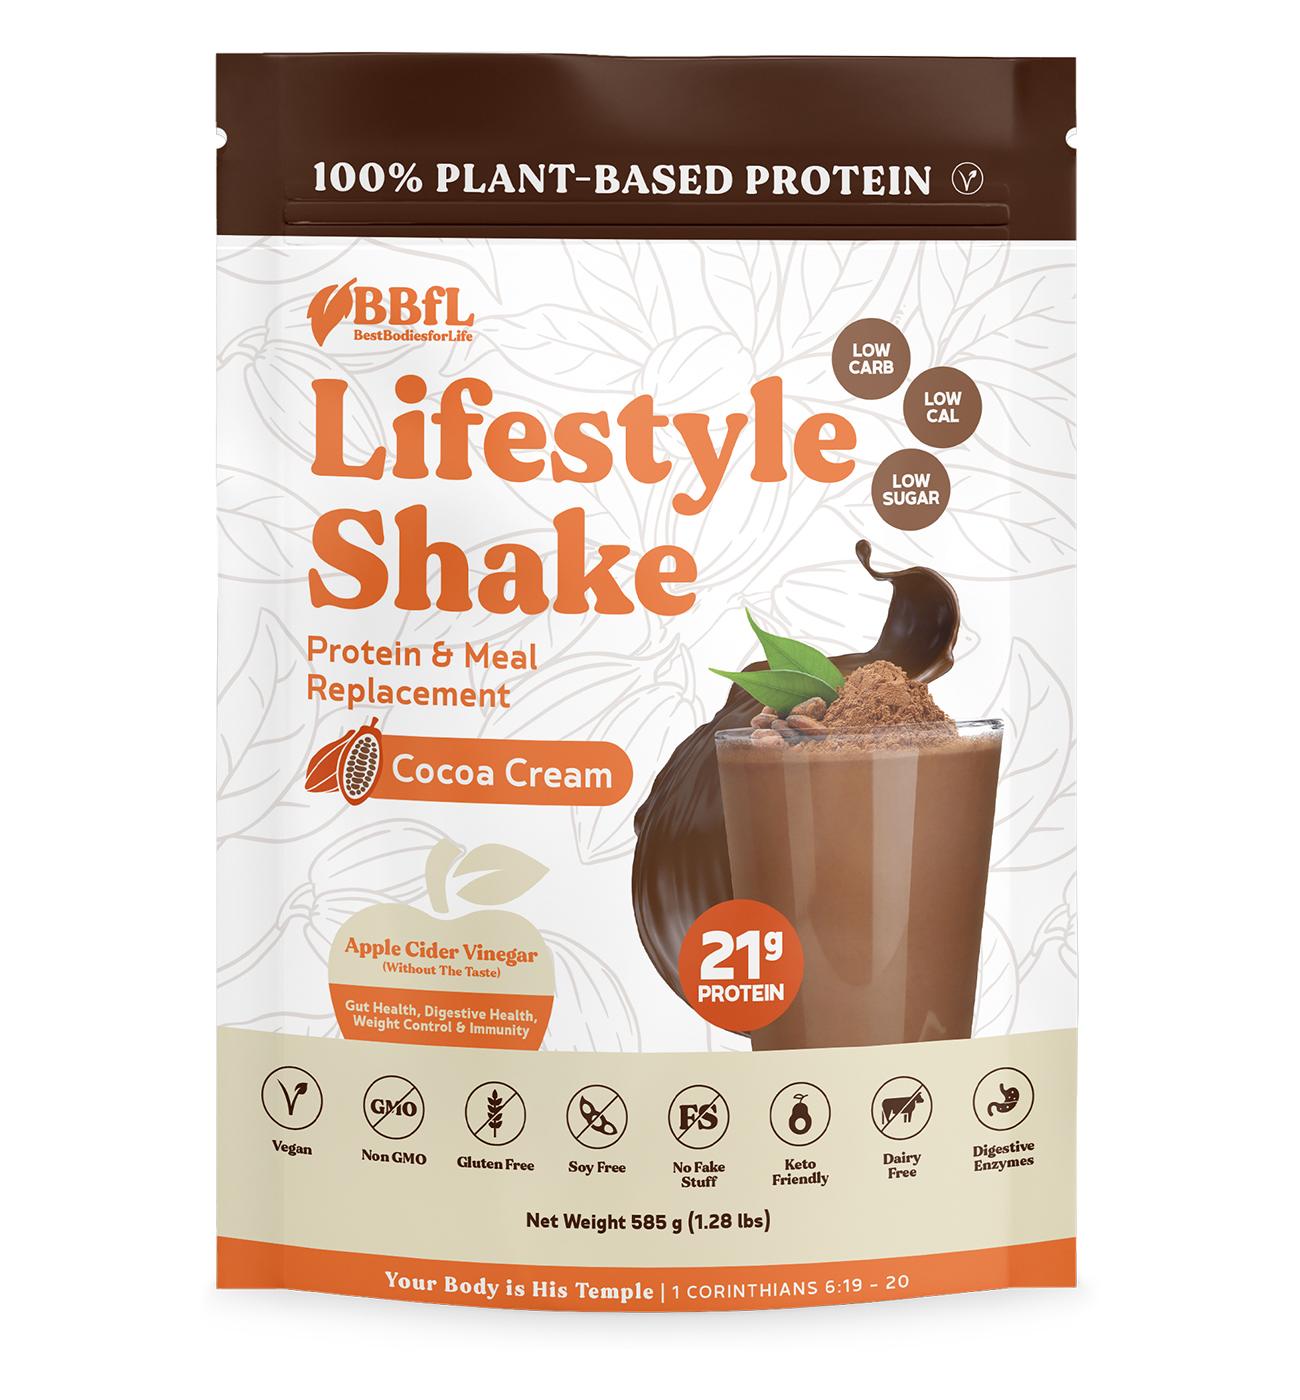 BestBodiesForLife 15g Protein & Meal Replacement Shake - Cocoa Cream; image 1 of 2